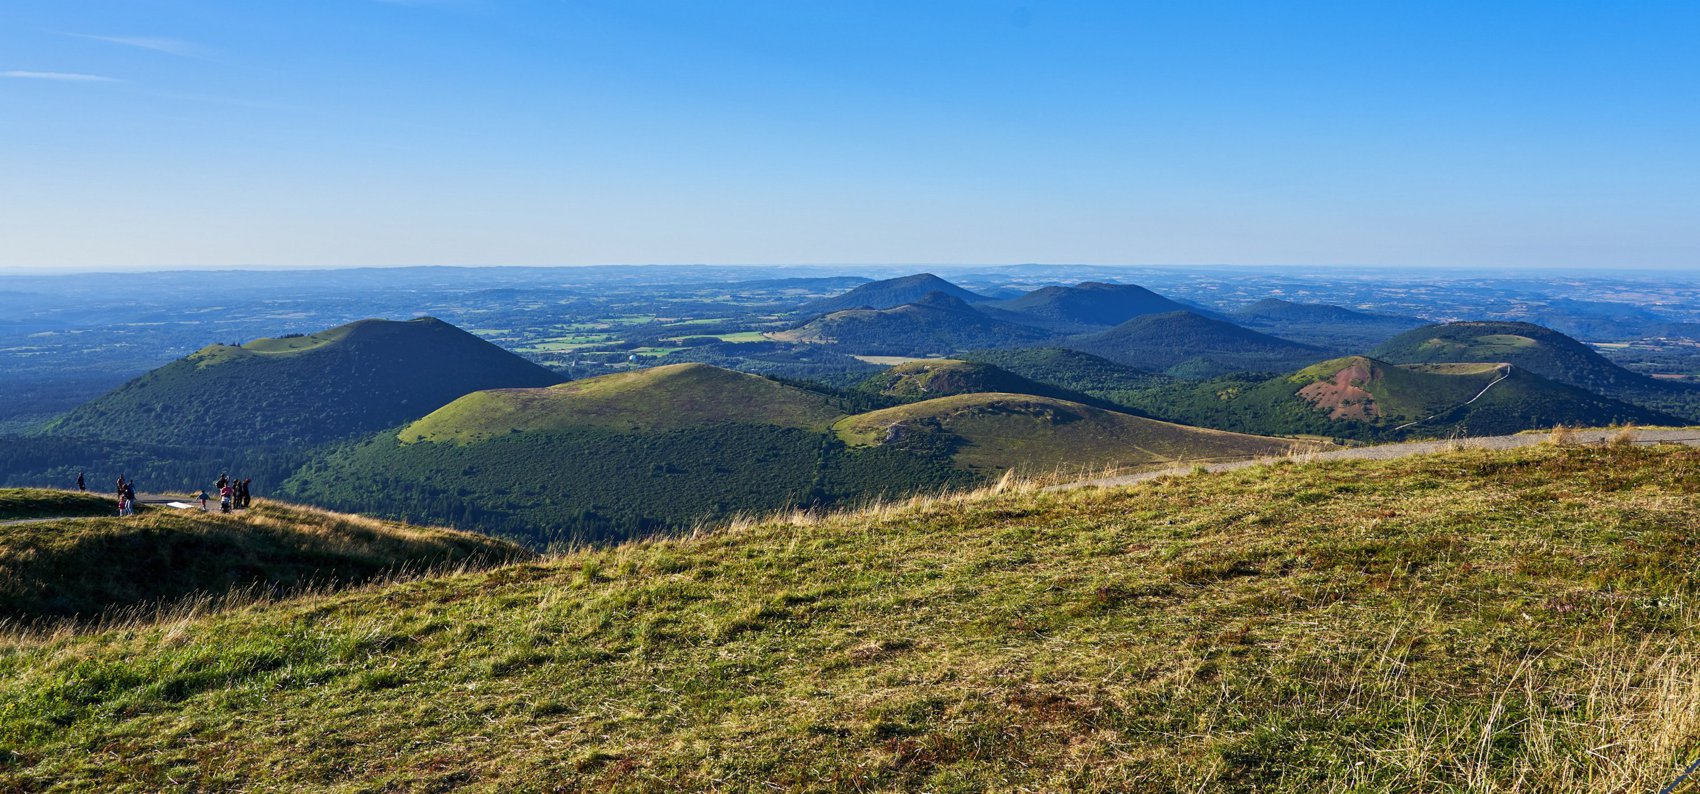 Hero Image for Puy de Dome (Mountain) Summer 201808